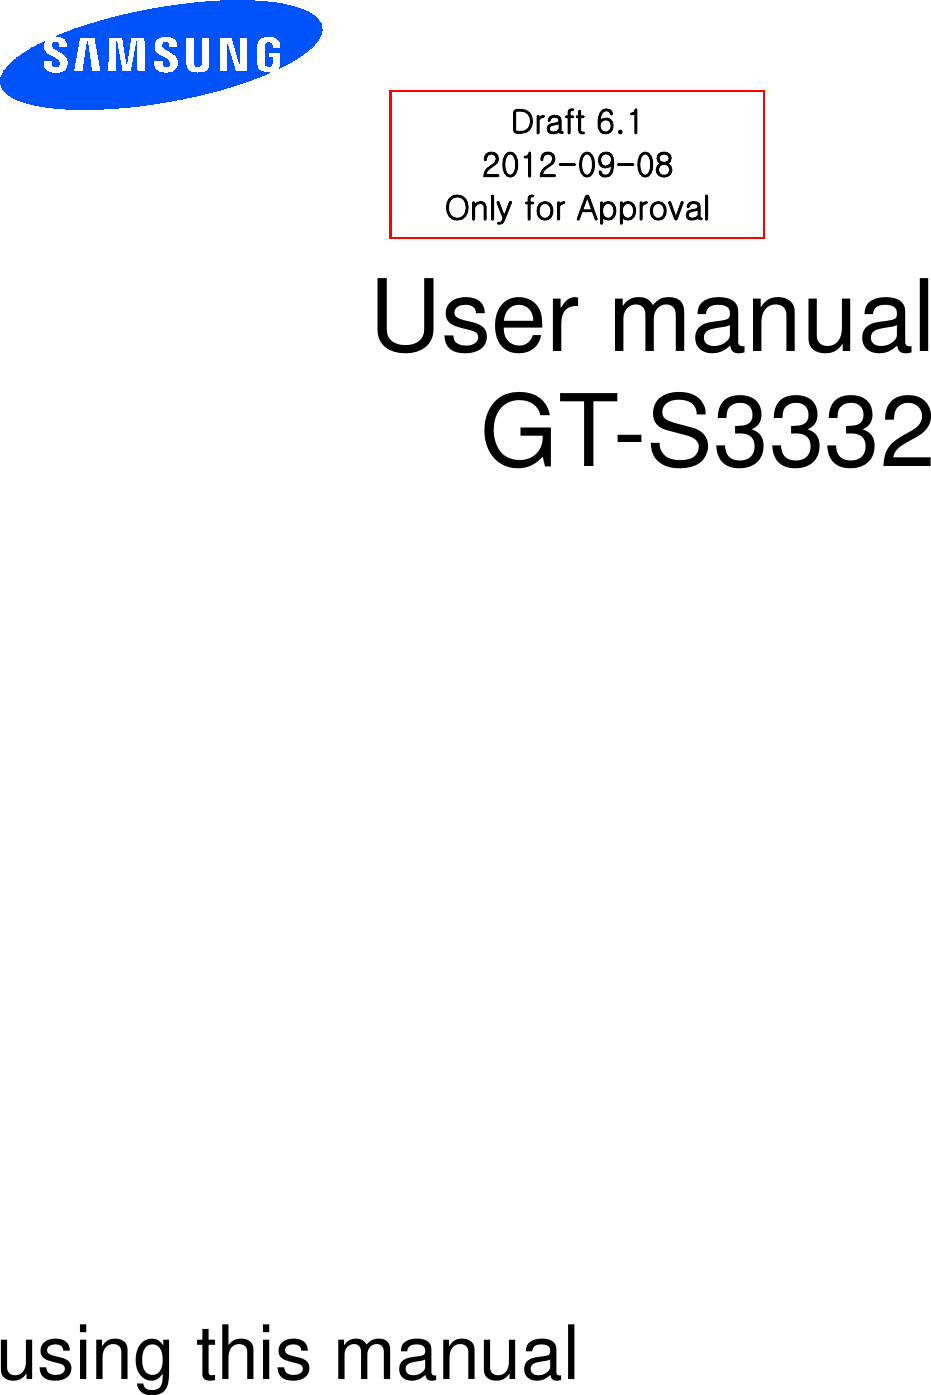         User manual GT-S3332               using this manual Draft 6.1 2012-09-08 Only for Approval 